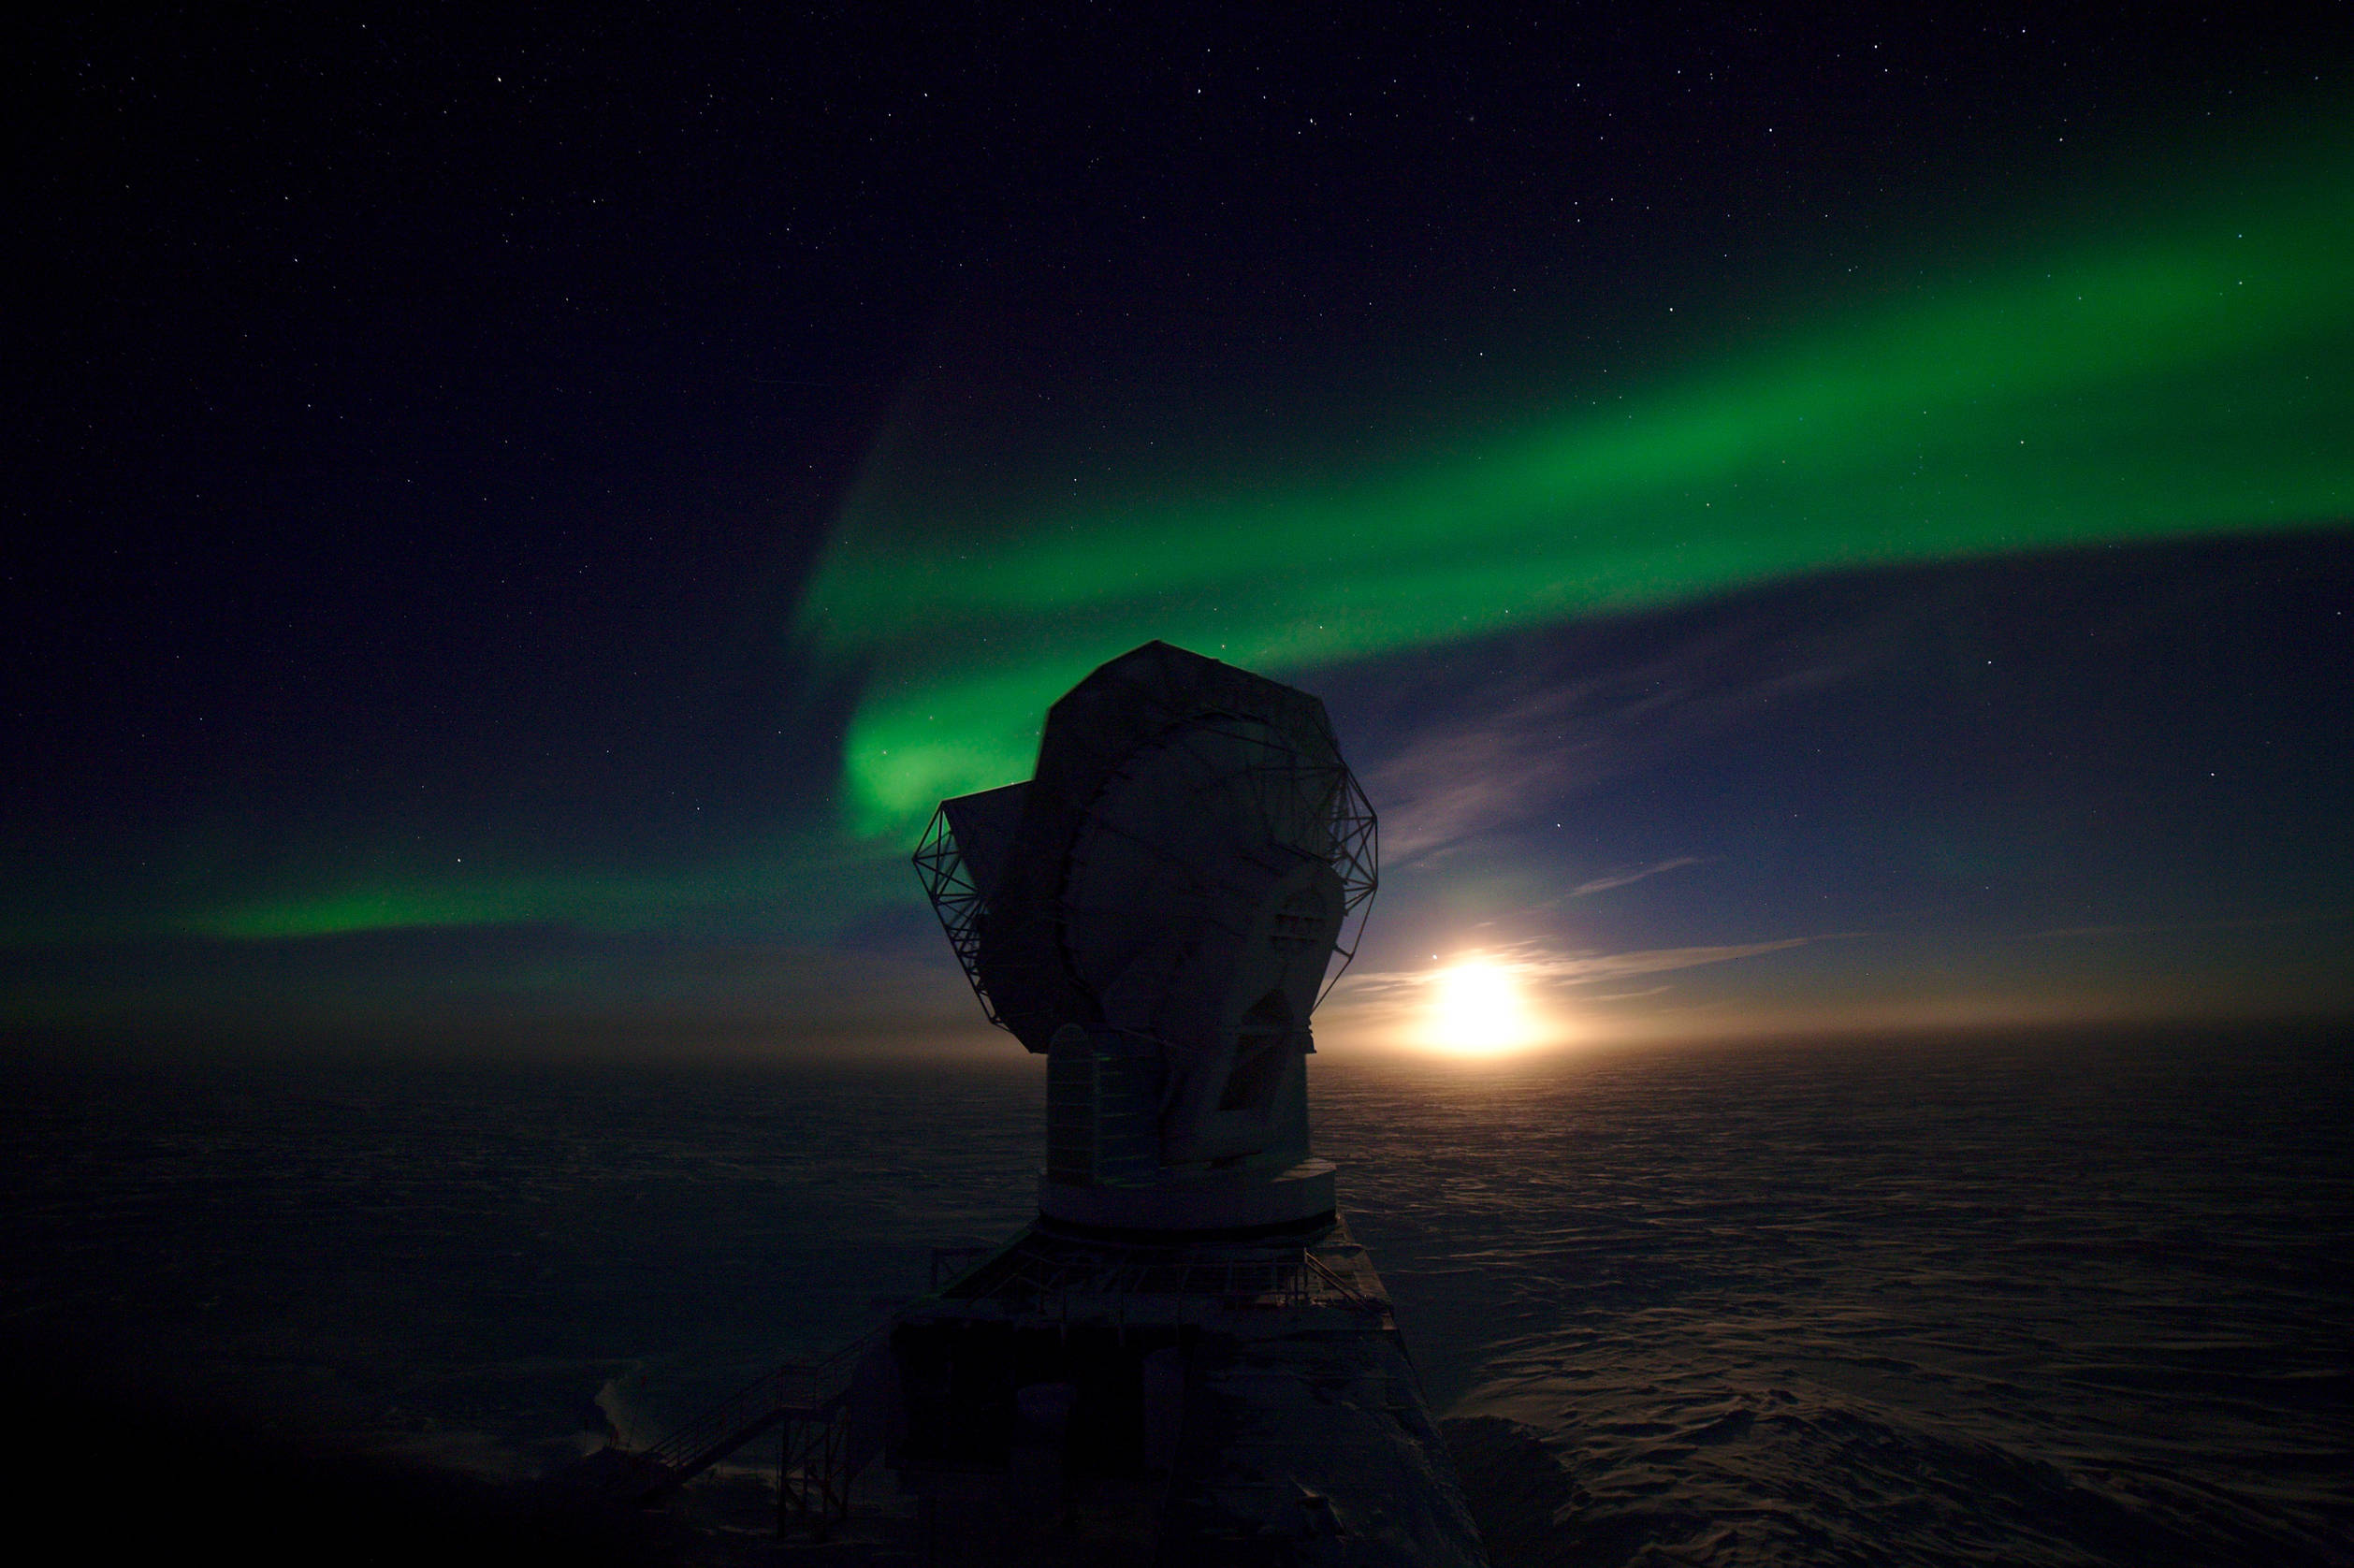 Early May, the moon behind the South Pole Telescope. The auroras were so strong that night that they were visible despite the glaring moon light.